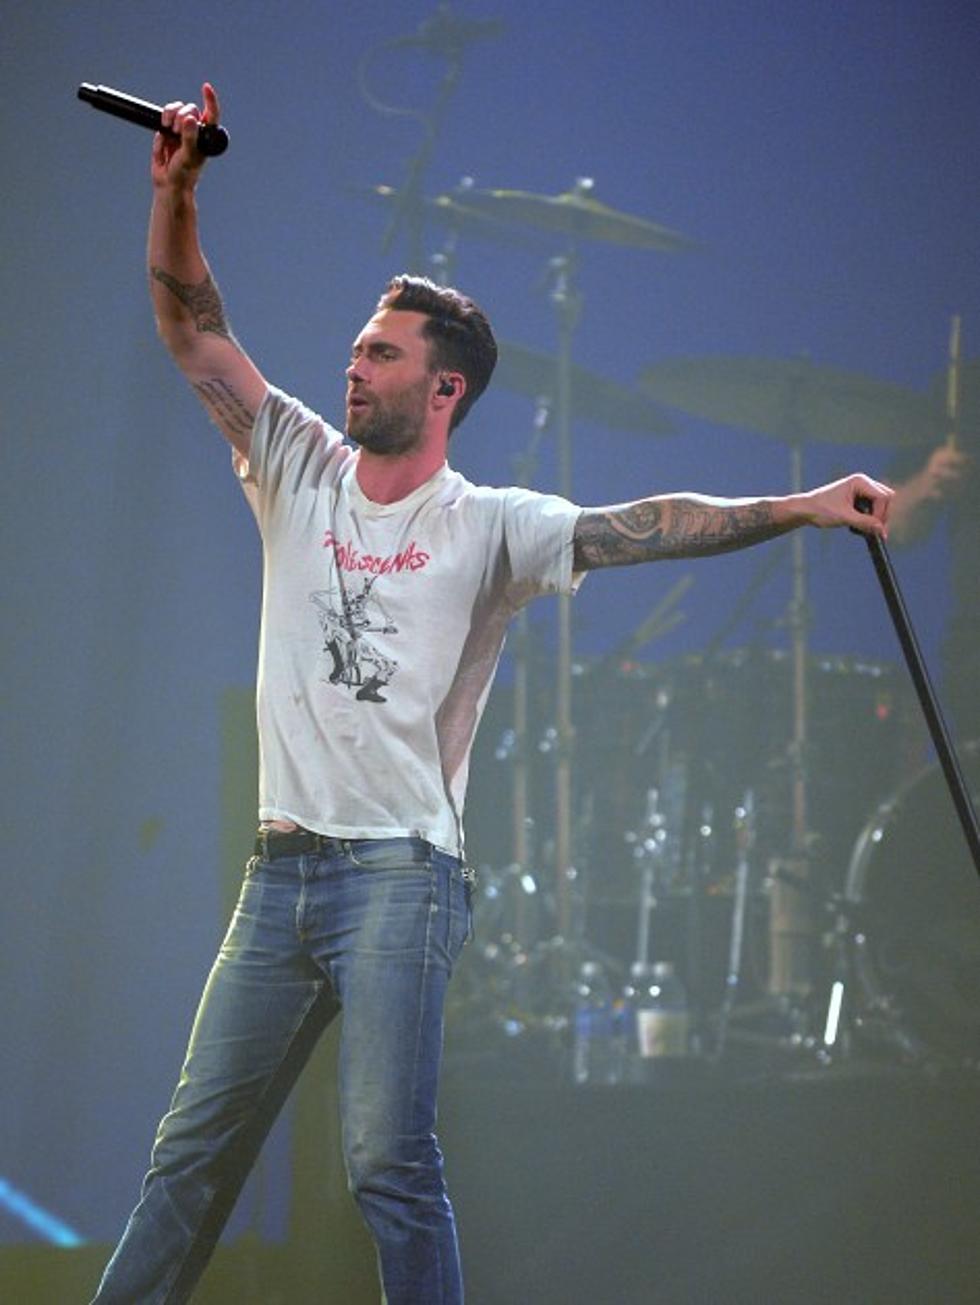 Adam Levine is “People” Magazine’s Sexiest Man Alive for 2013